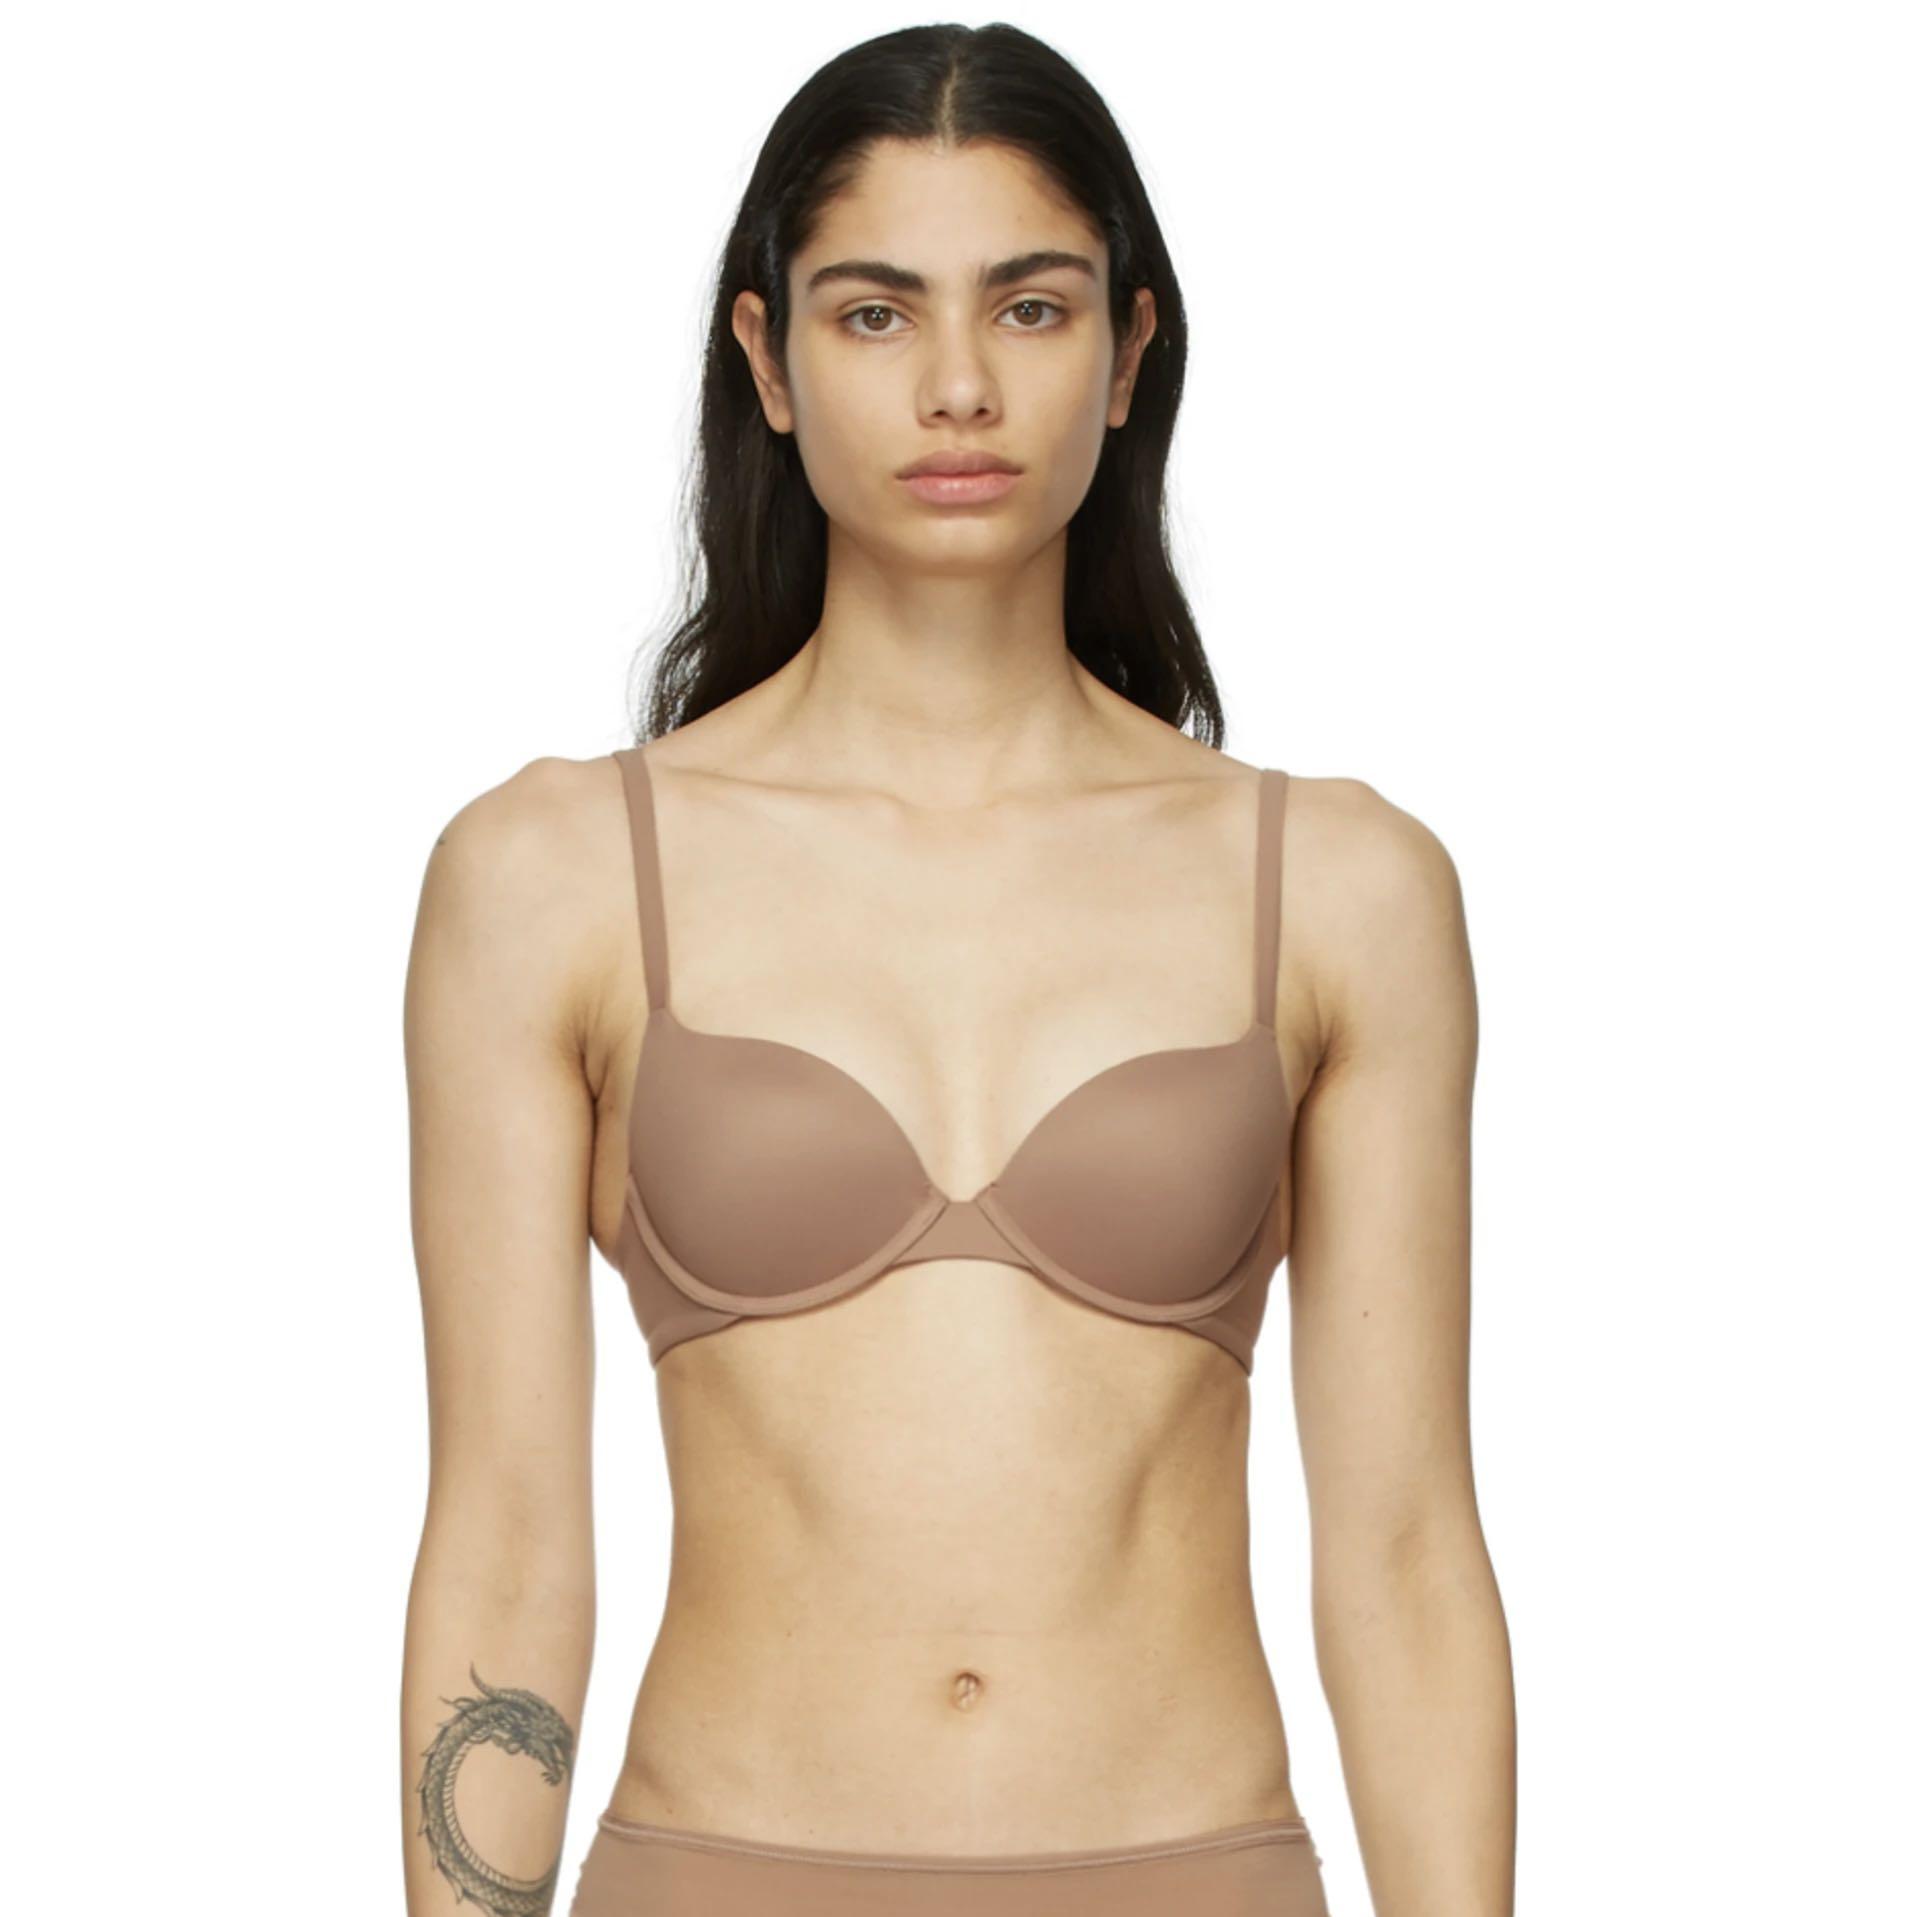 SKIMS Fits Everybody T-shirt Push-up Bra in Sienna 32A Size 32 A